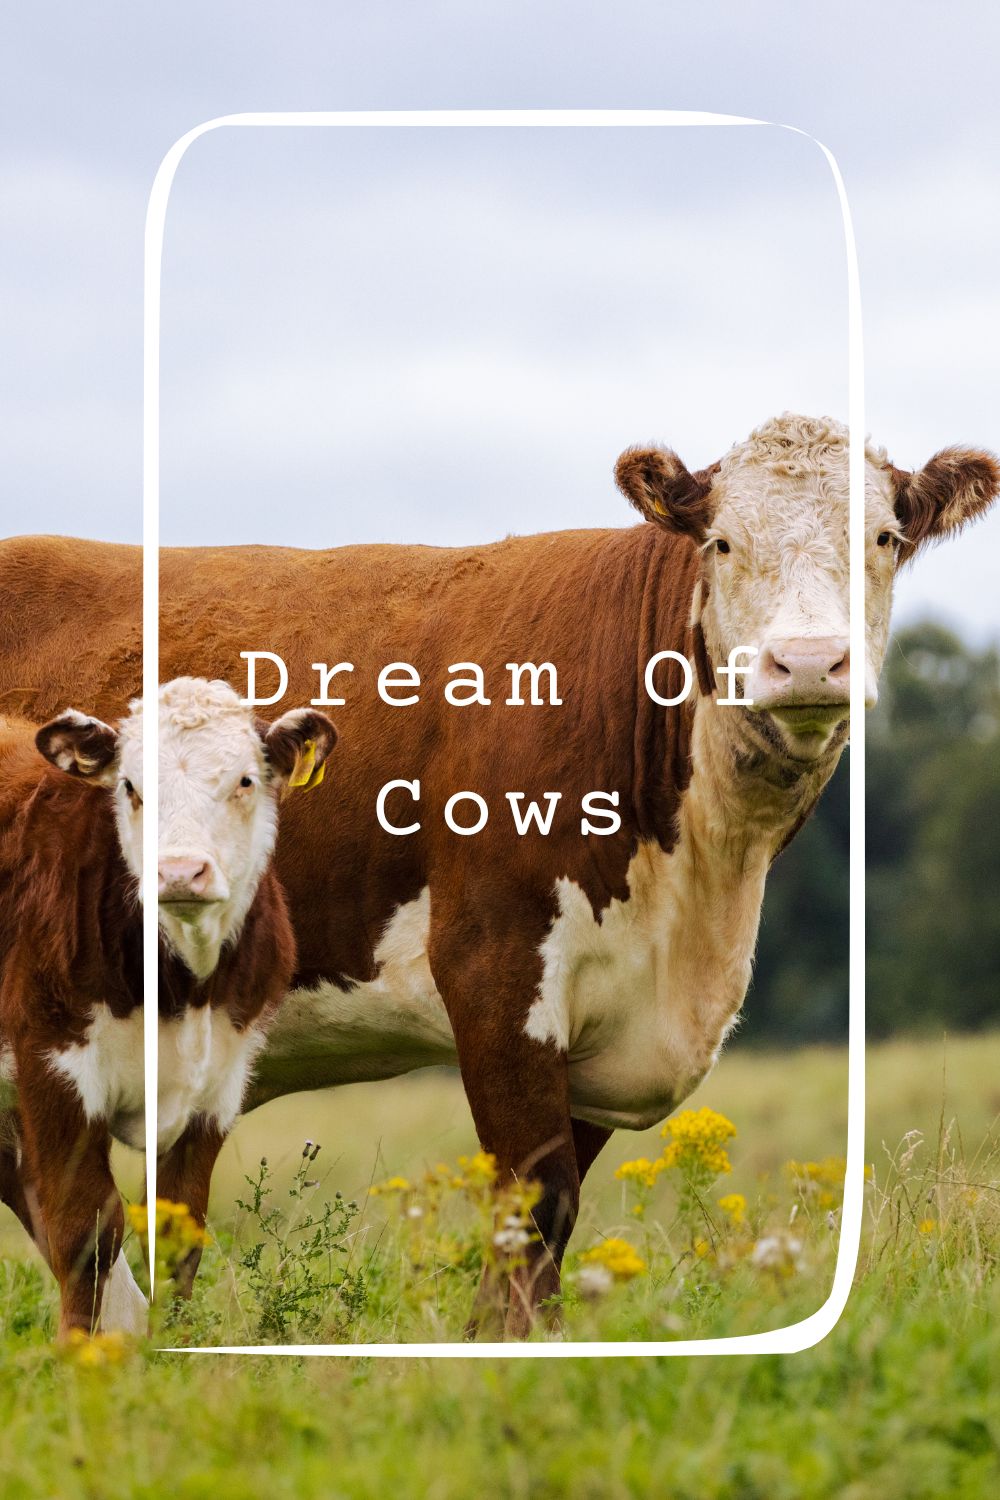 Dream Of Cows Meanings 1